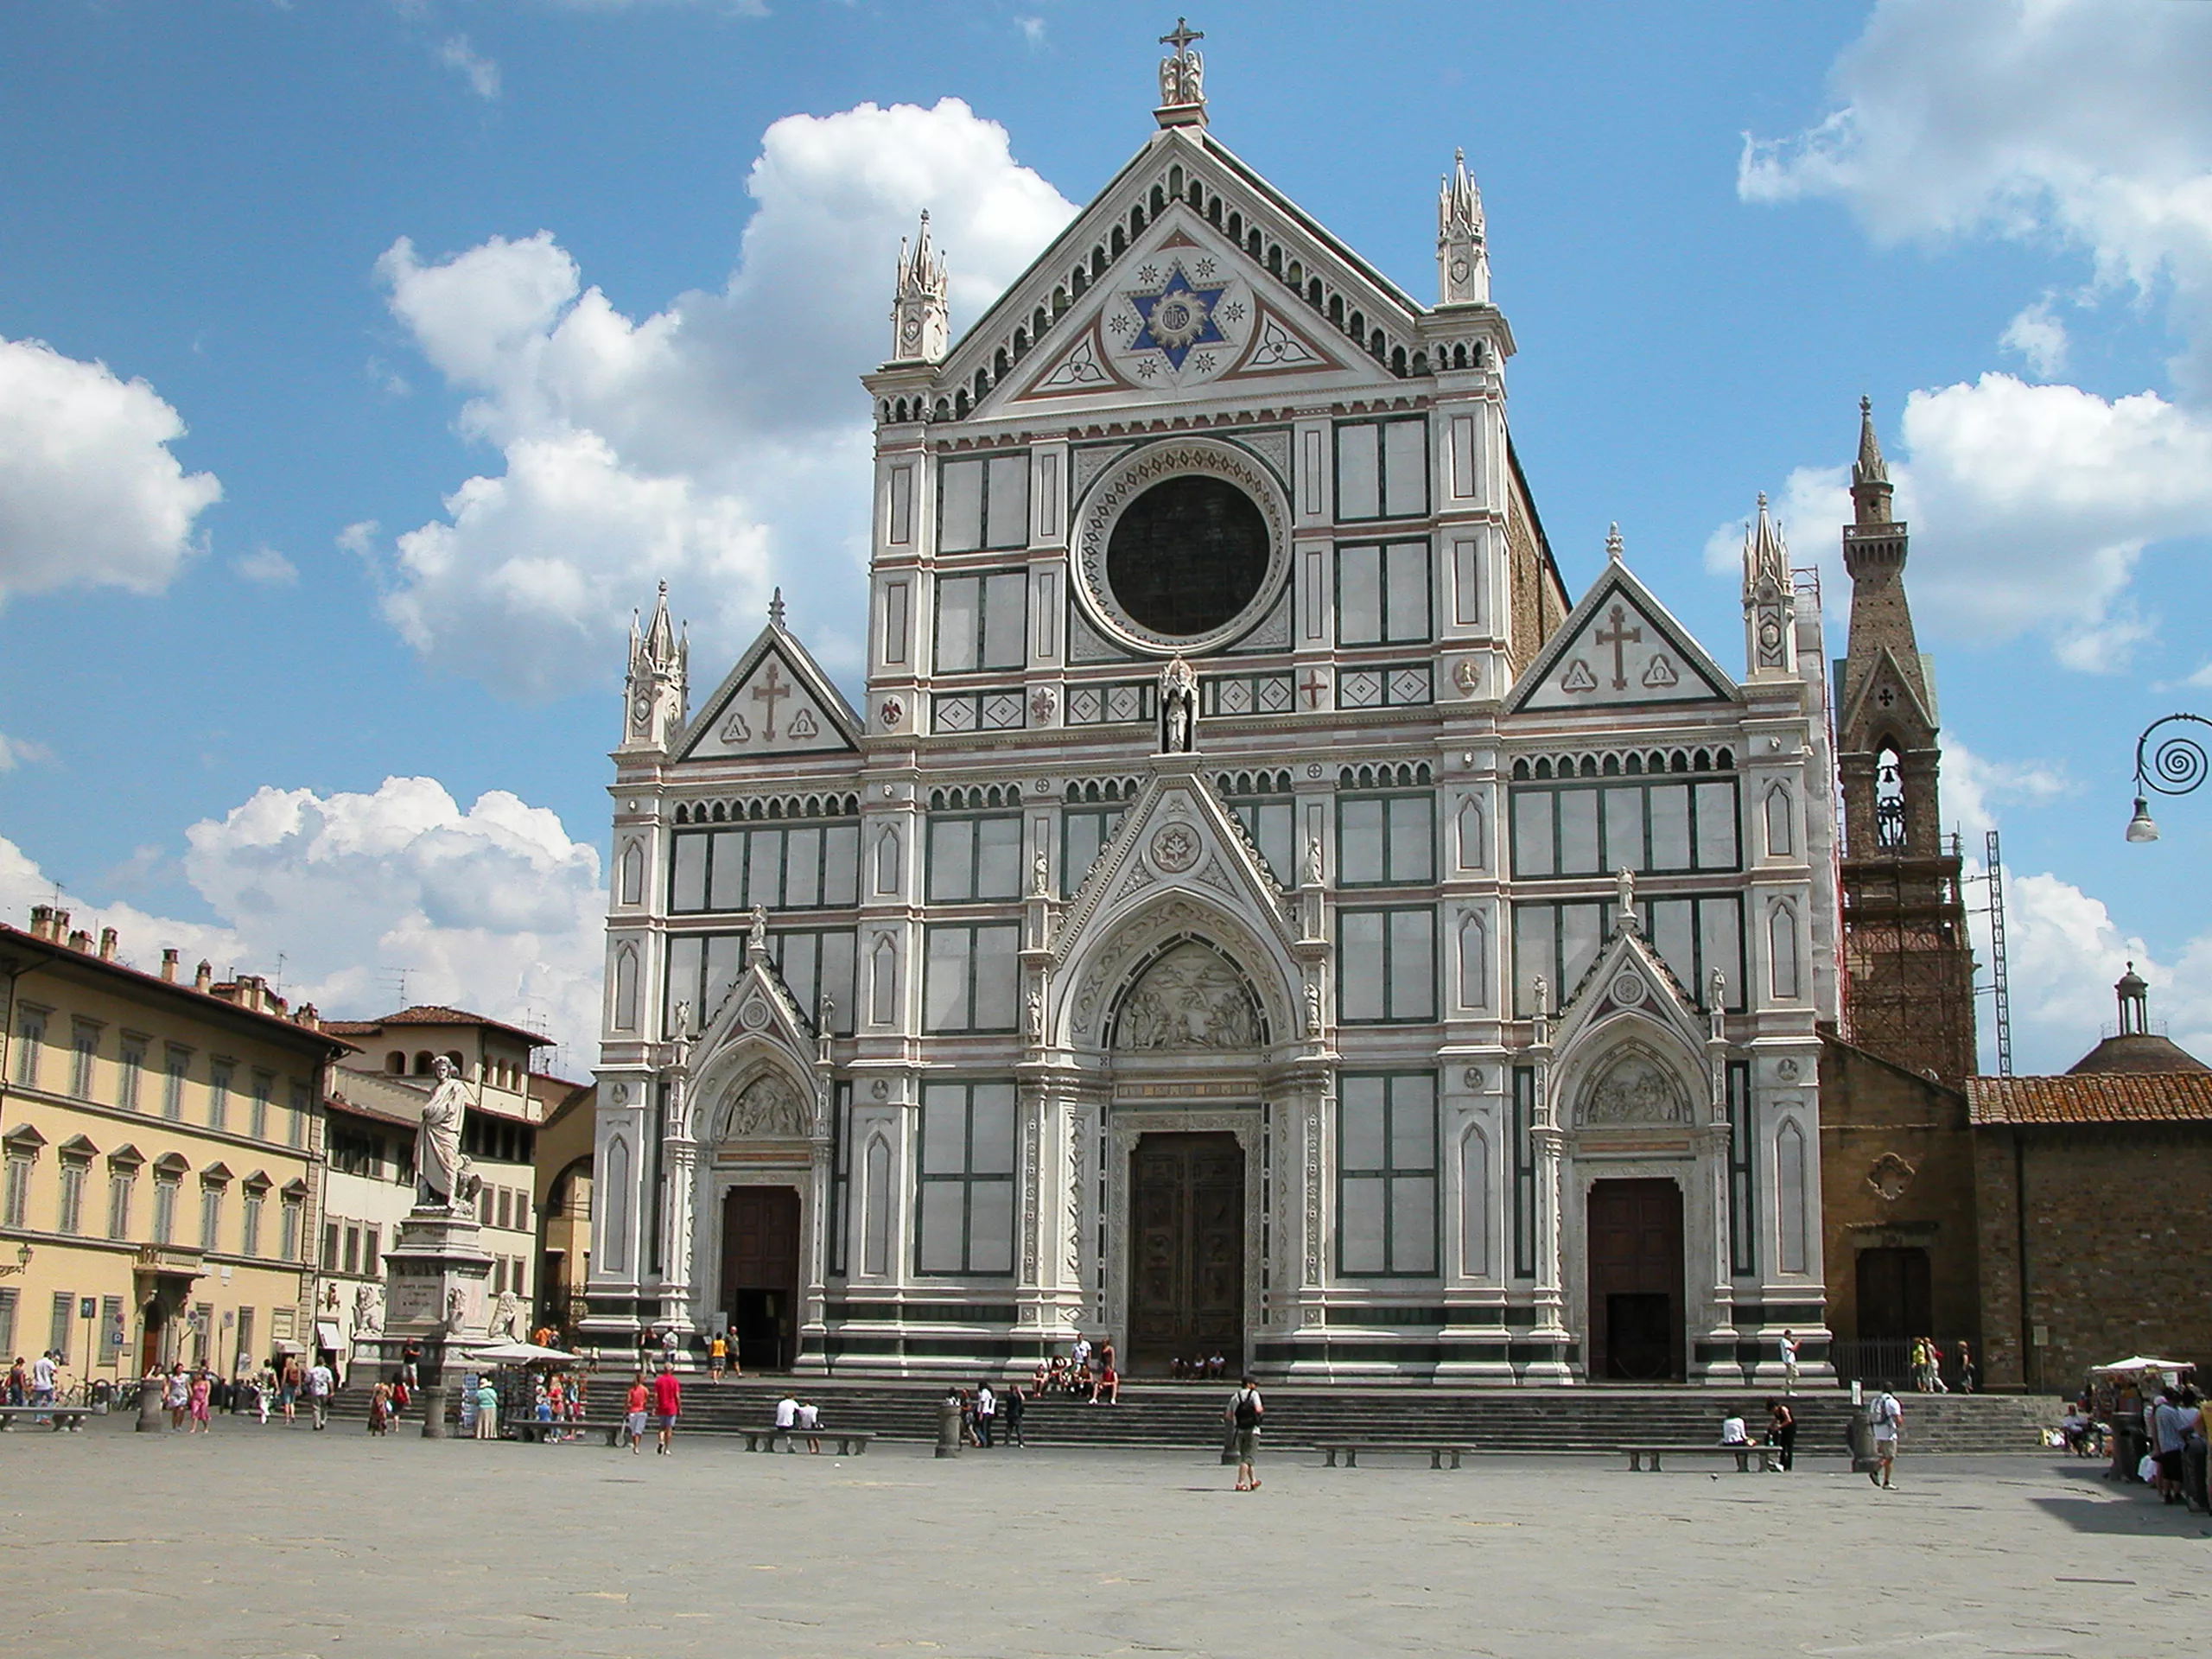 Basilica of Santa Croce in Italy, Europe | Architecture - Rated 4.3